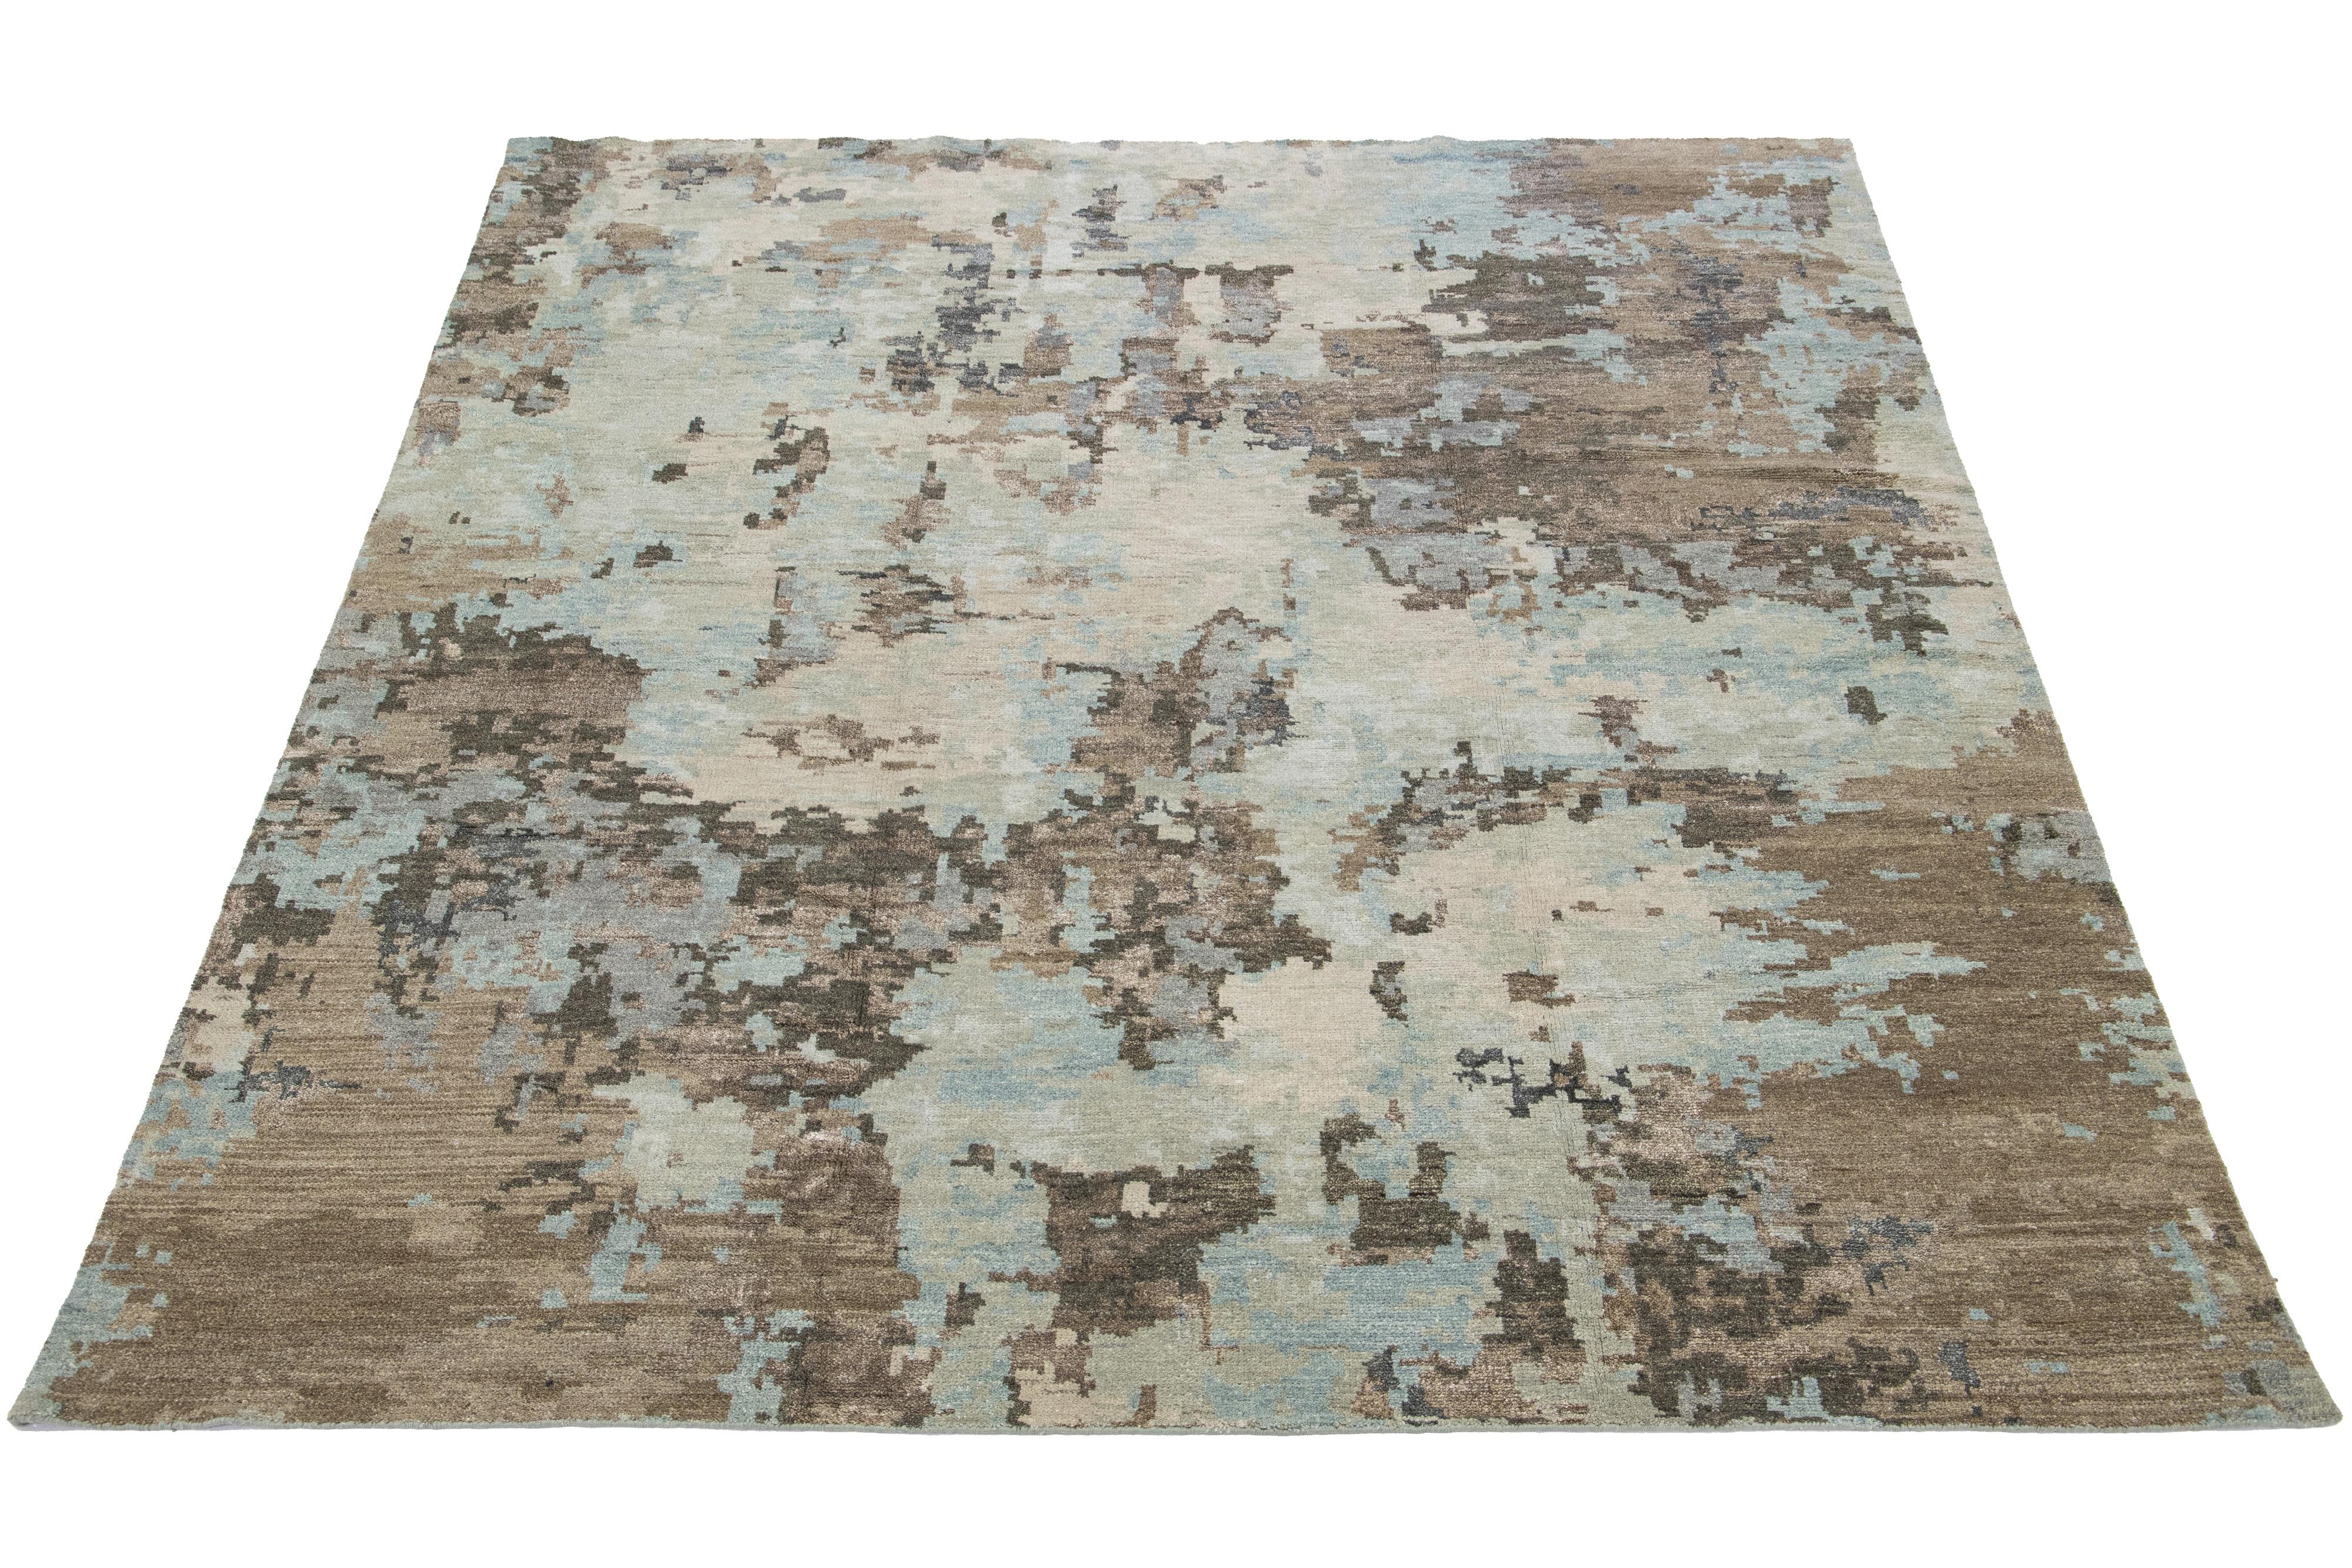 This beautiful modern hand-knotted rug is made of wool and silk and features a color field of beige, blue, gray, and brown. The rug has a stunning all-over abstract design.

This rug measures 8'3